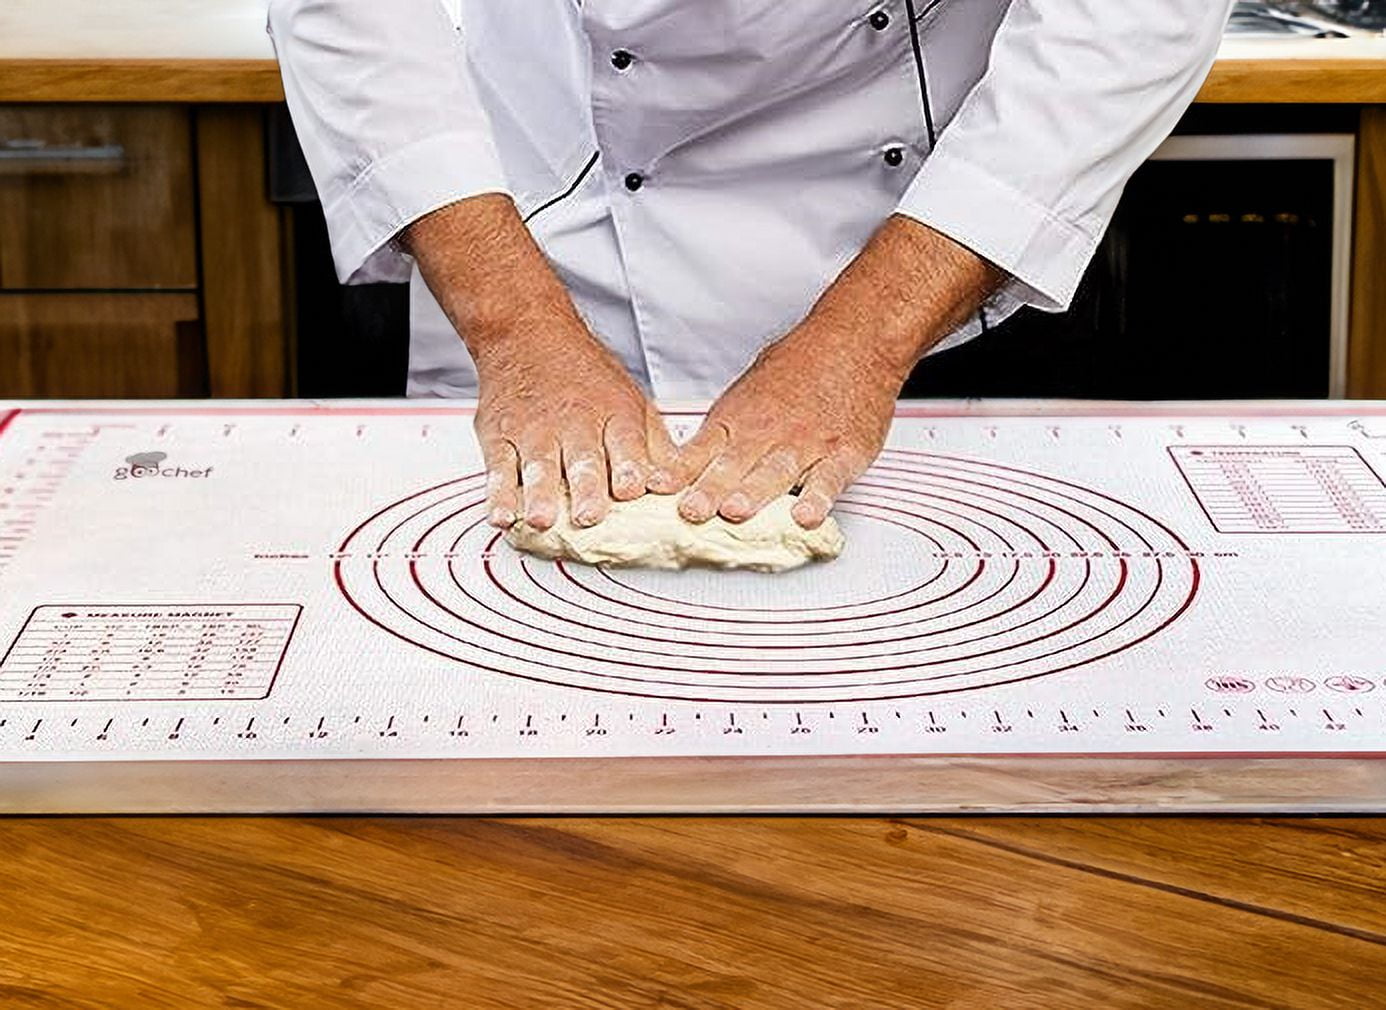 16.5x24.5 Rolling and Baking Silicone Mat - Whisk